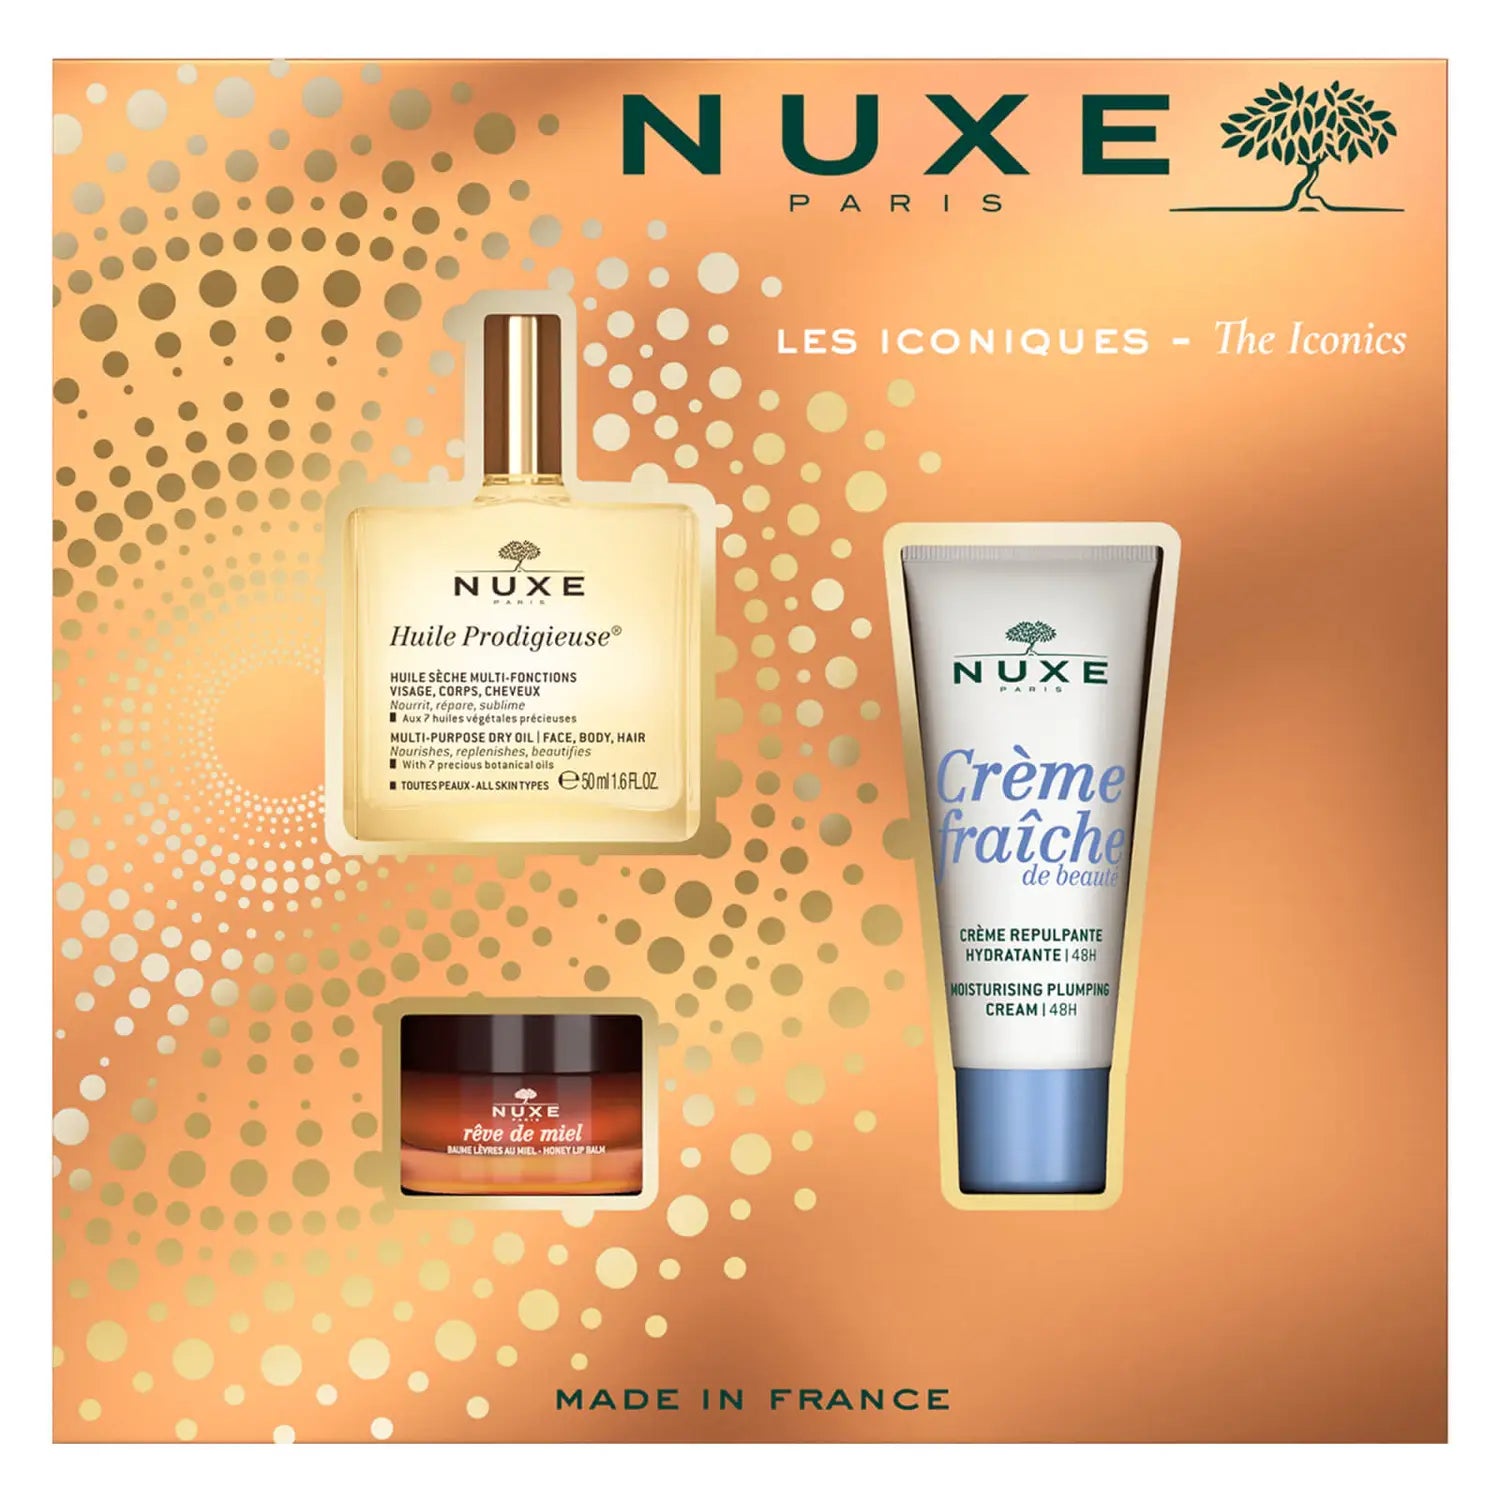 Nuxe The Iconics set Face Care Gift Set - The essentials for resplendent beauty